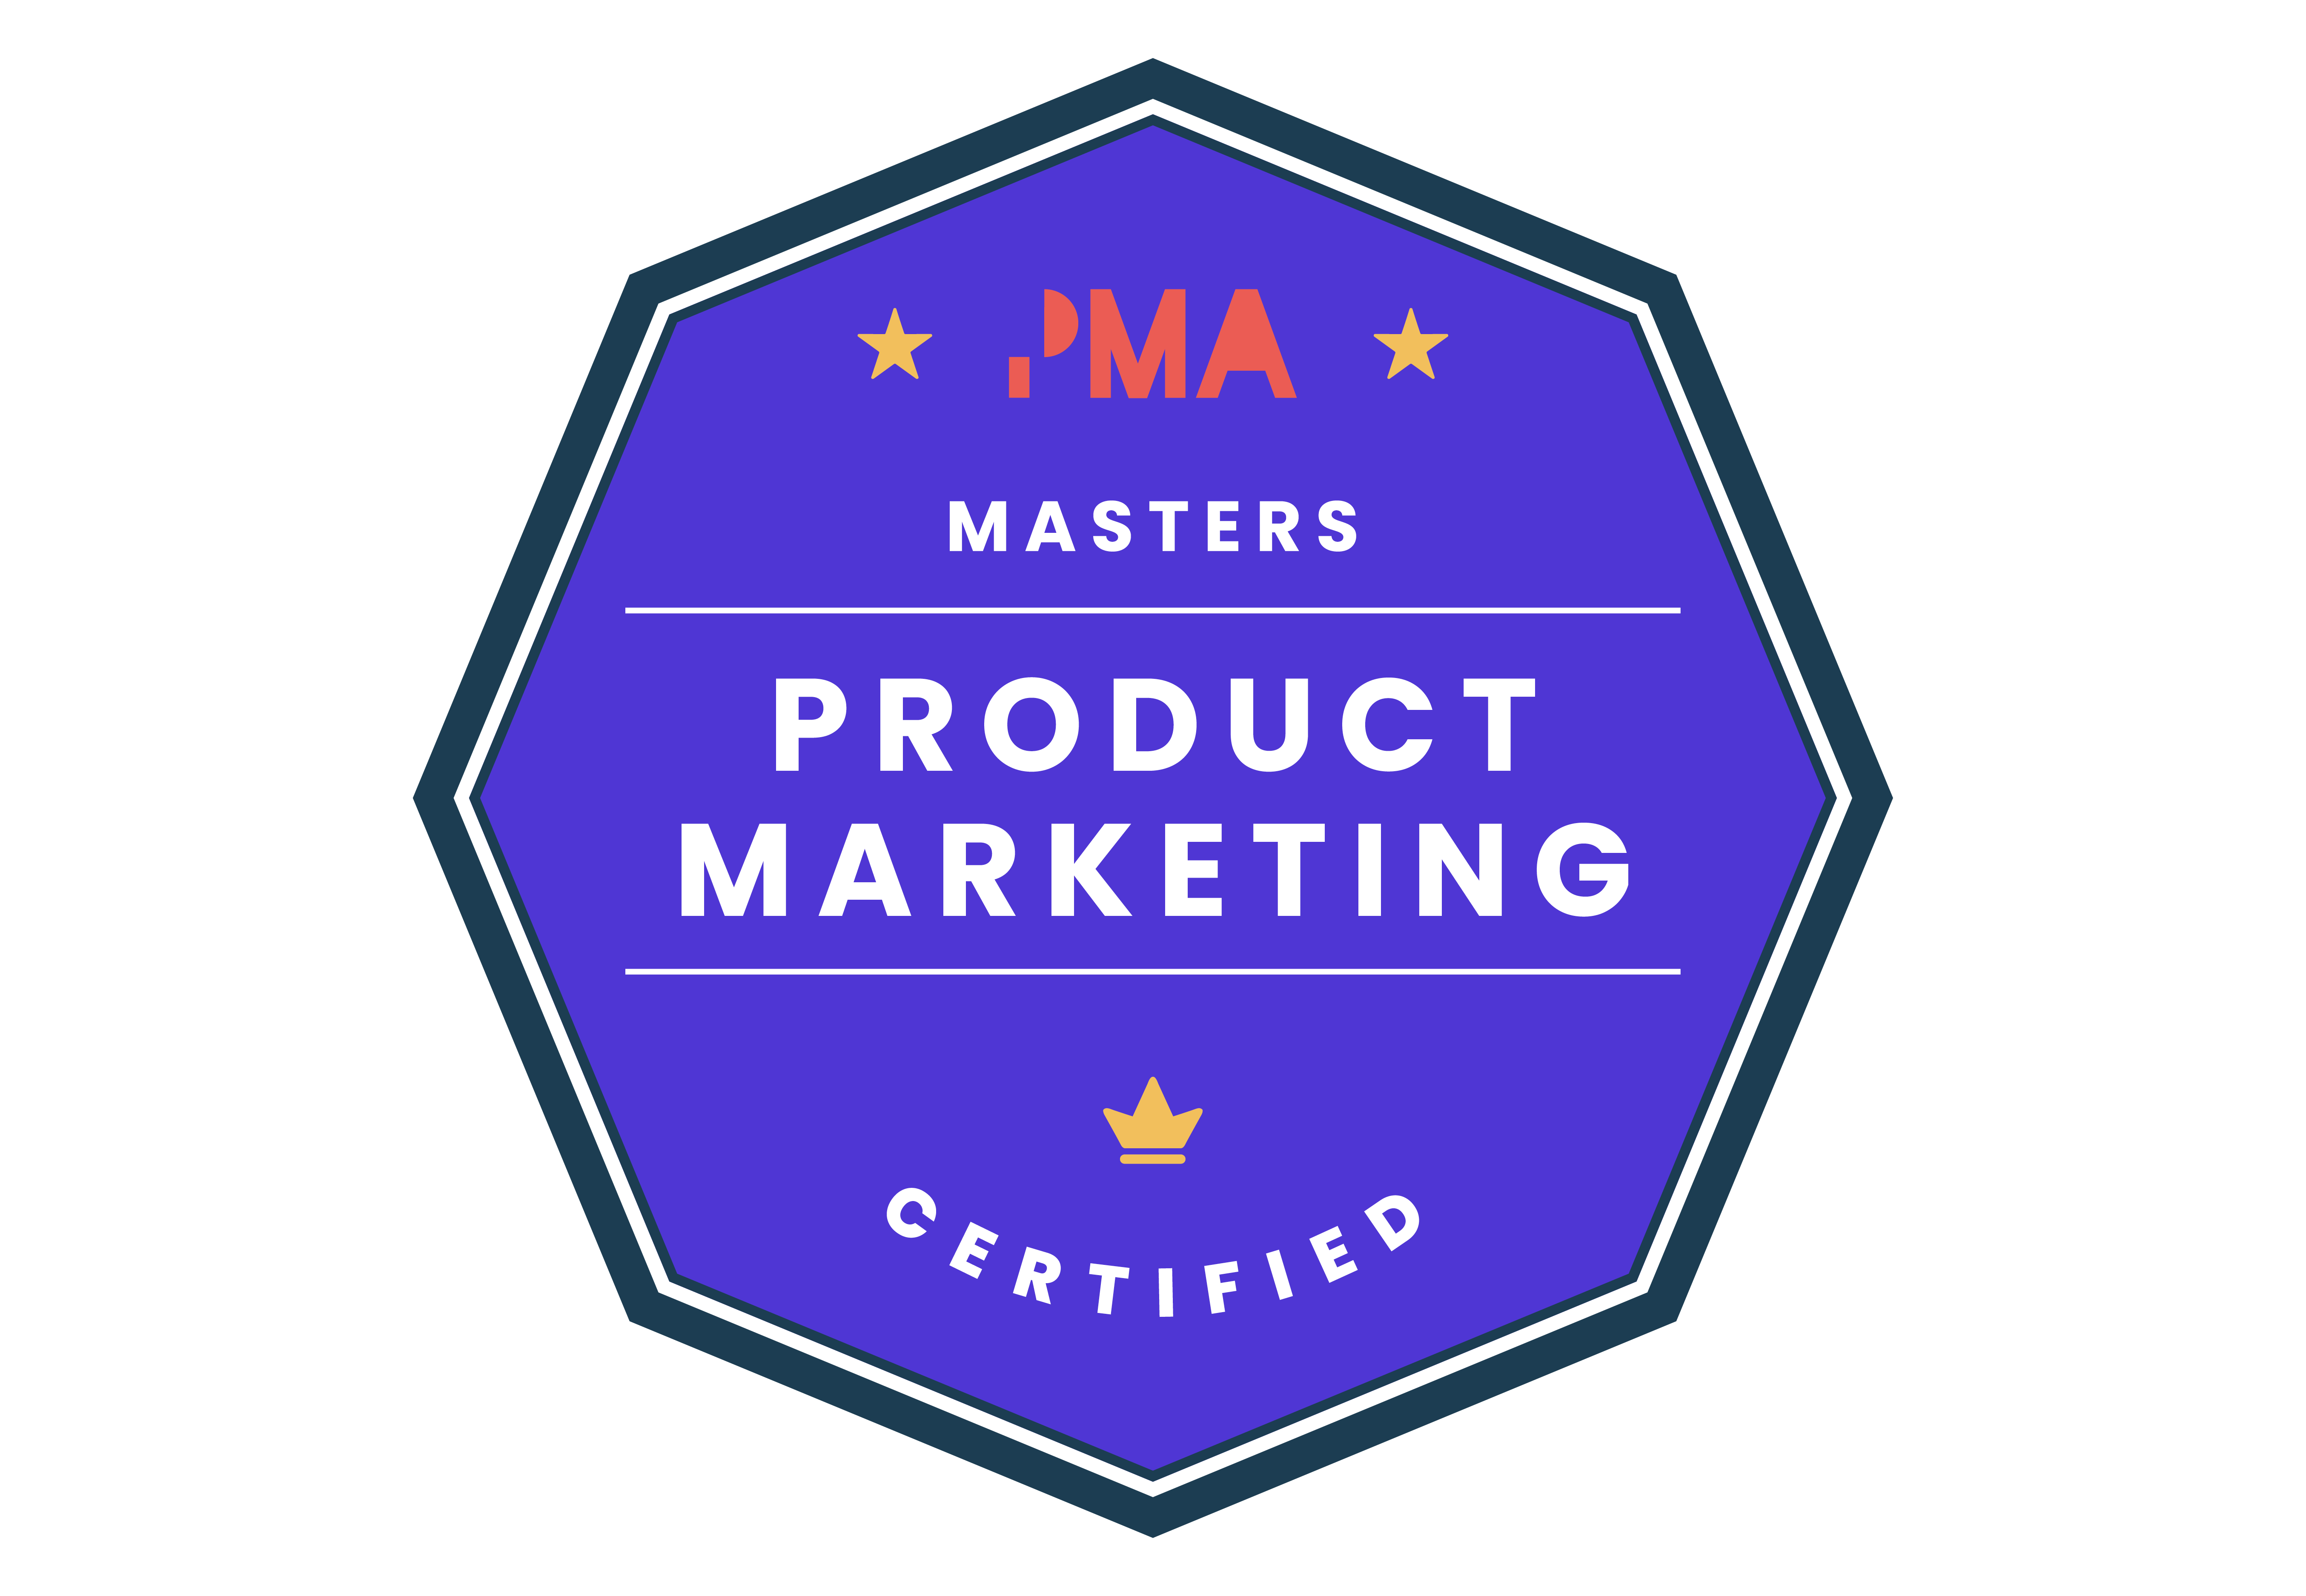 Mastering Product Marketing Certified | Masters badge